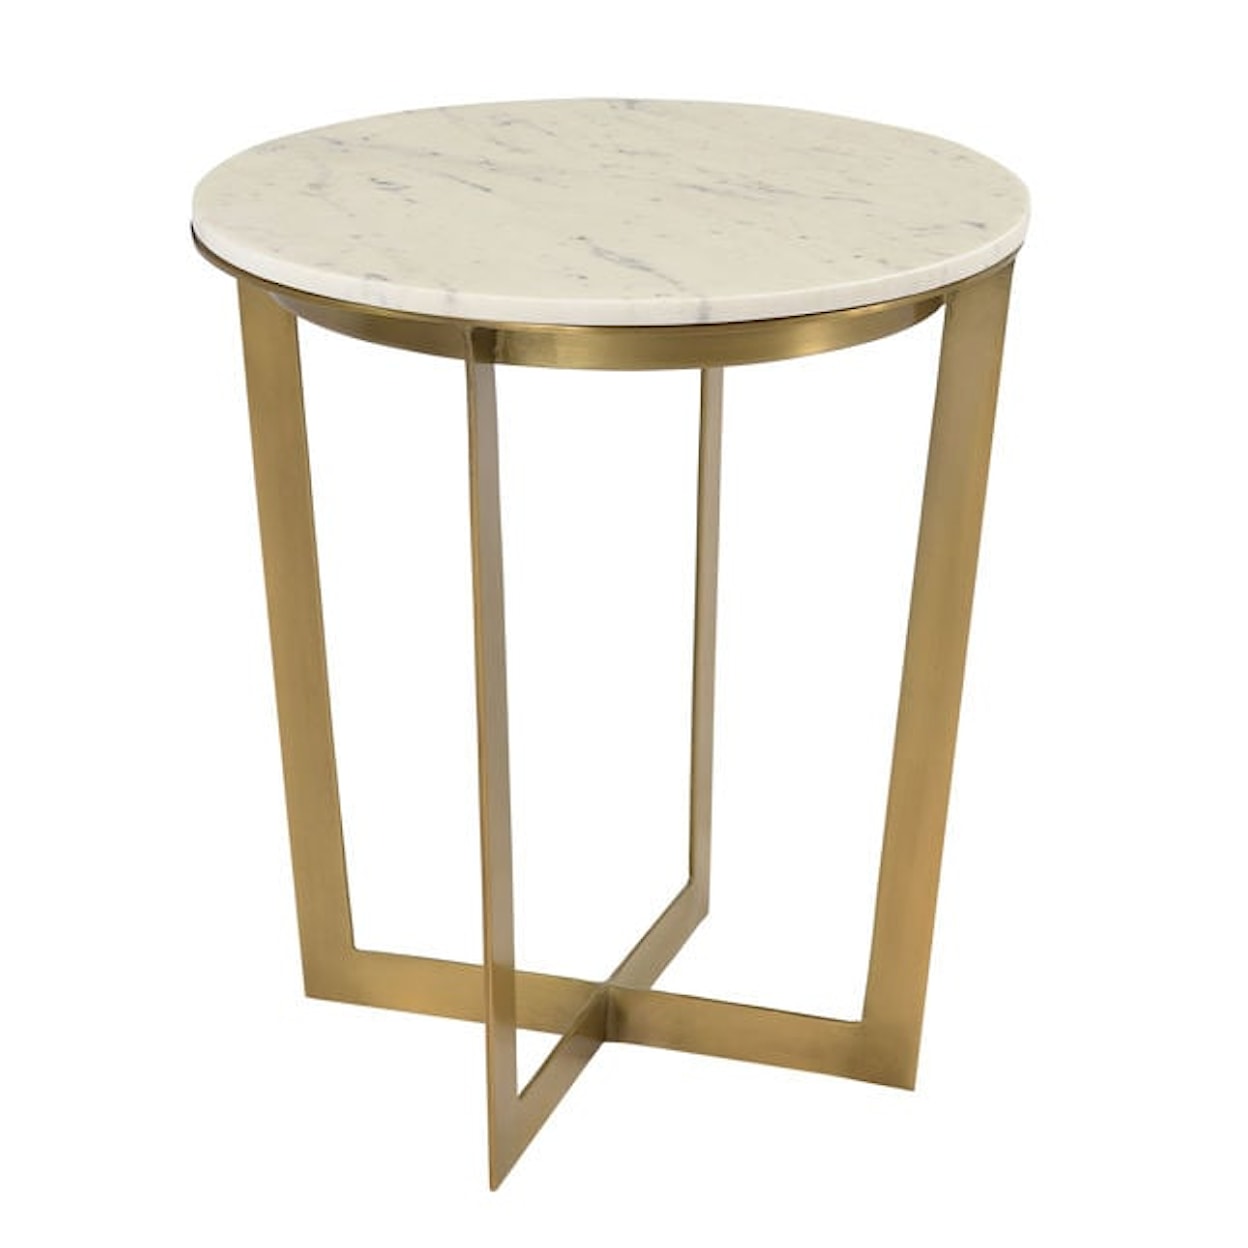 Dovetail Furniture Clinton Clinton Side Table